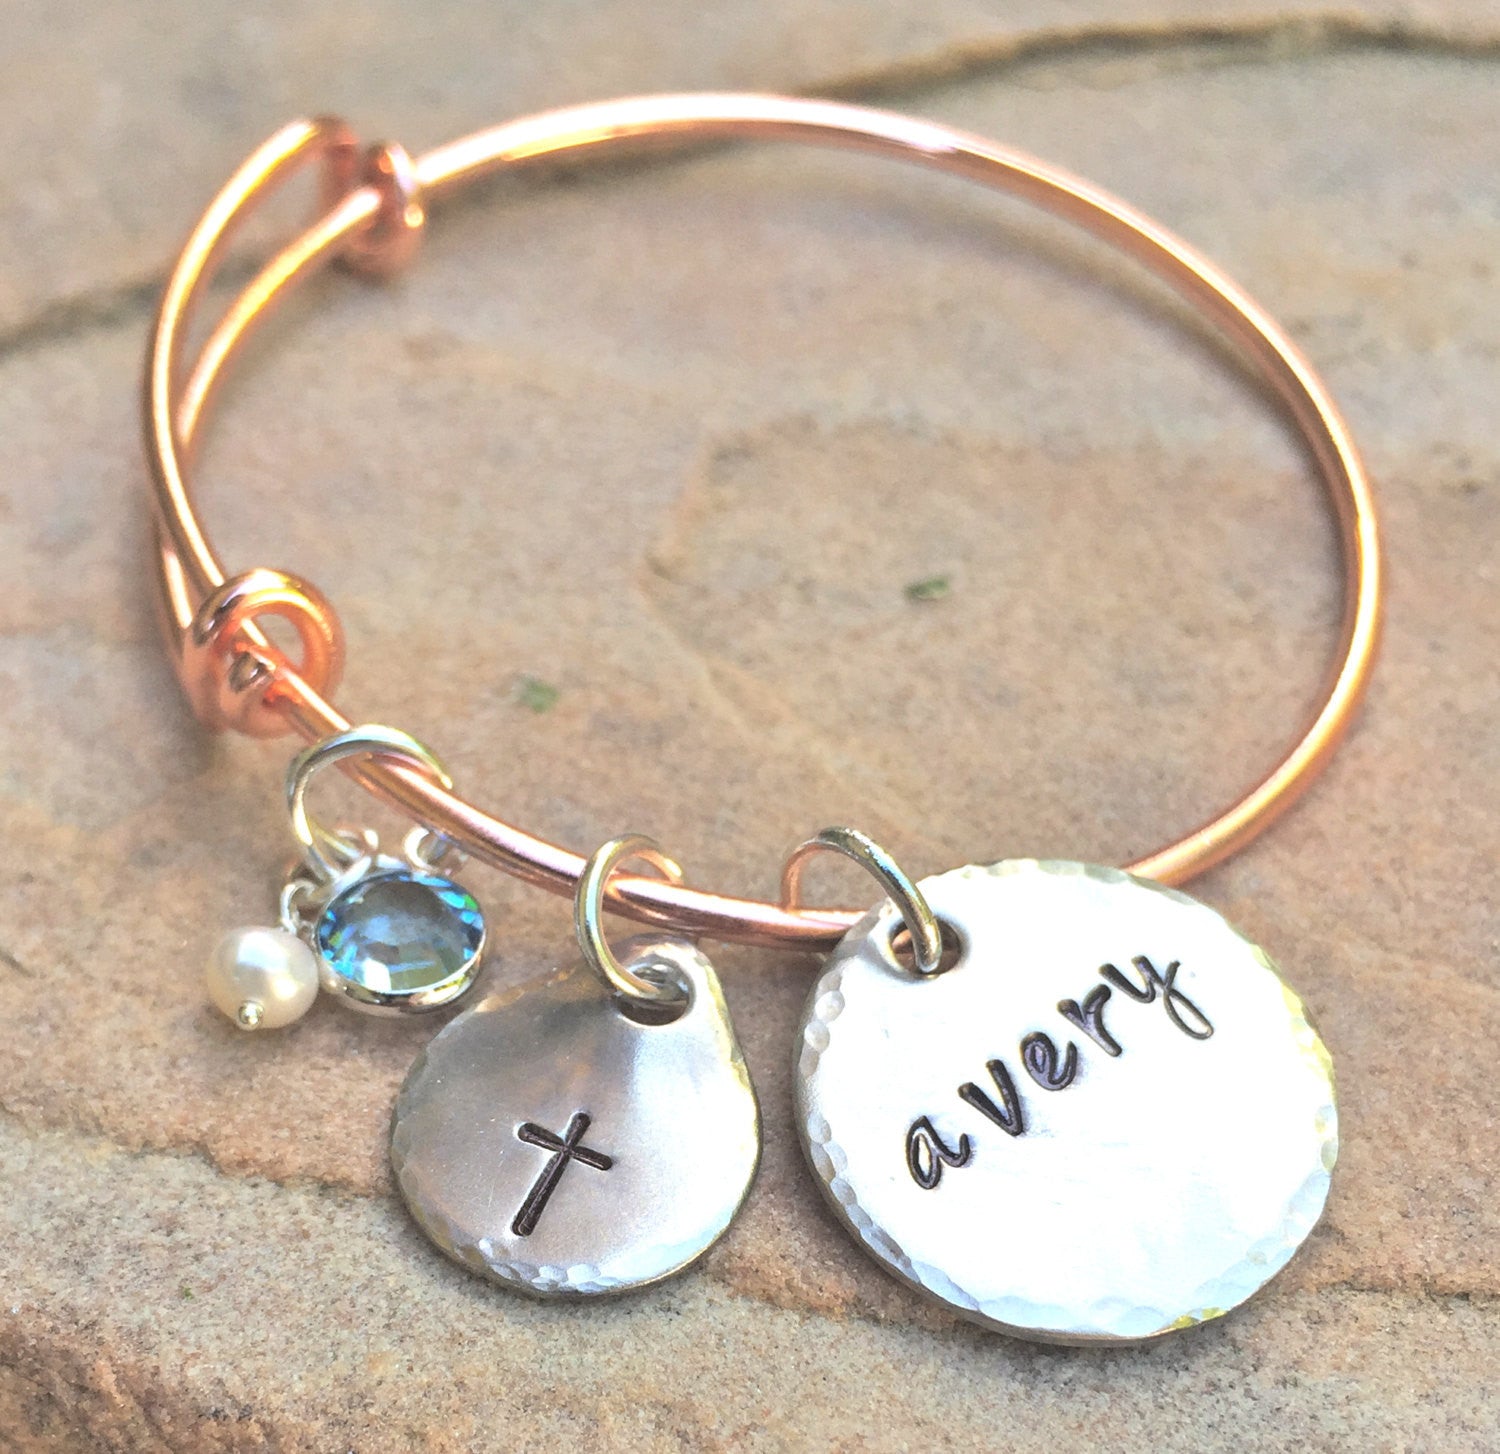 First Communion Gifts, Toddler Bangle, Personalized Toddler Bangle